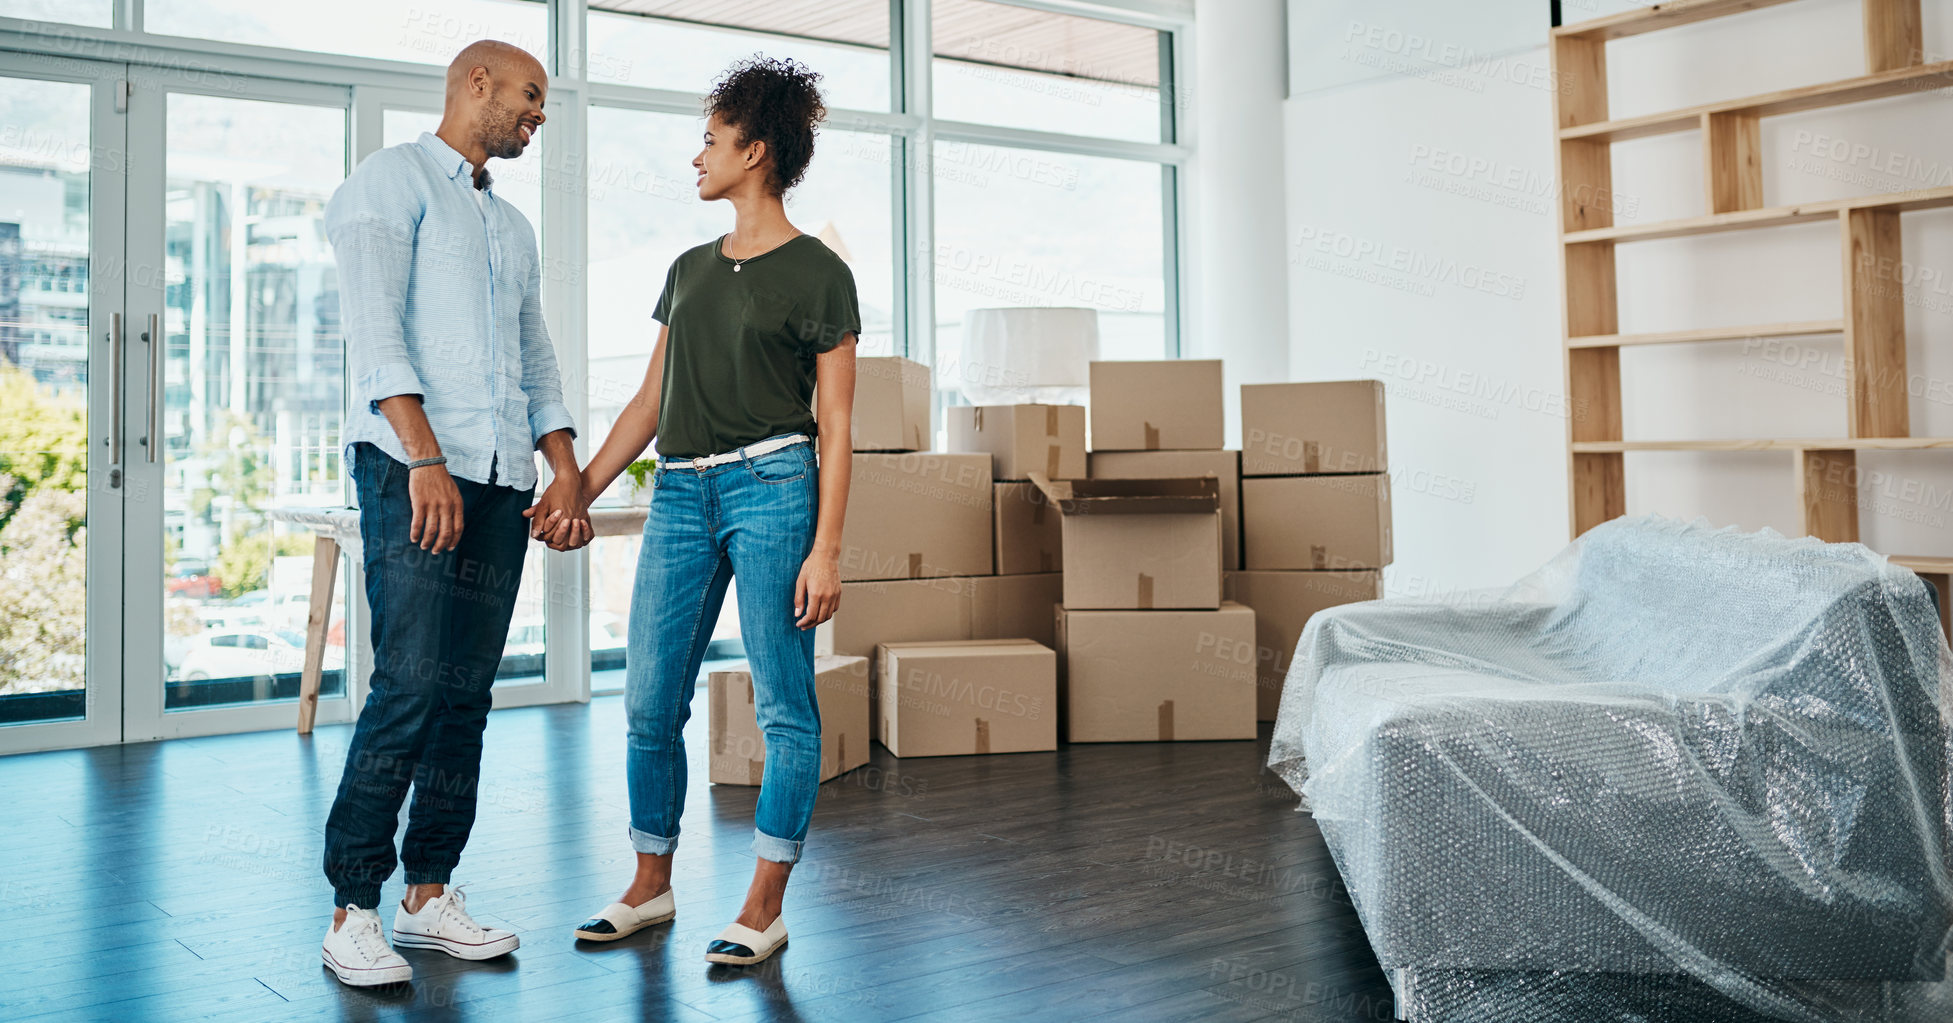 Buy stock photo Shot of a young couple holding hands while moving house